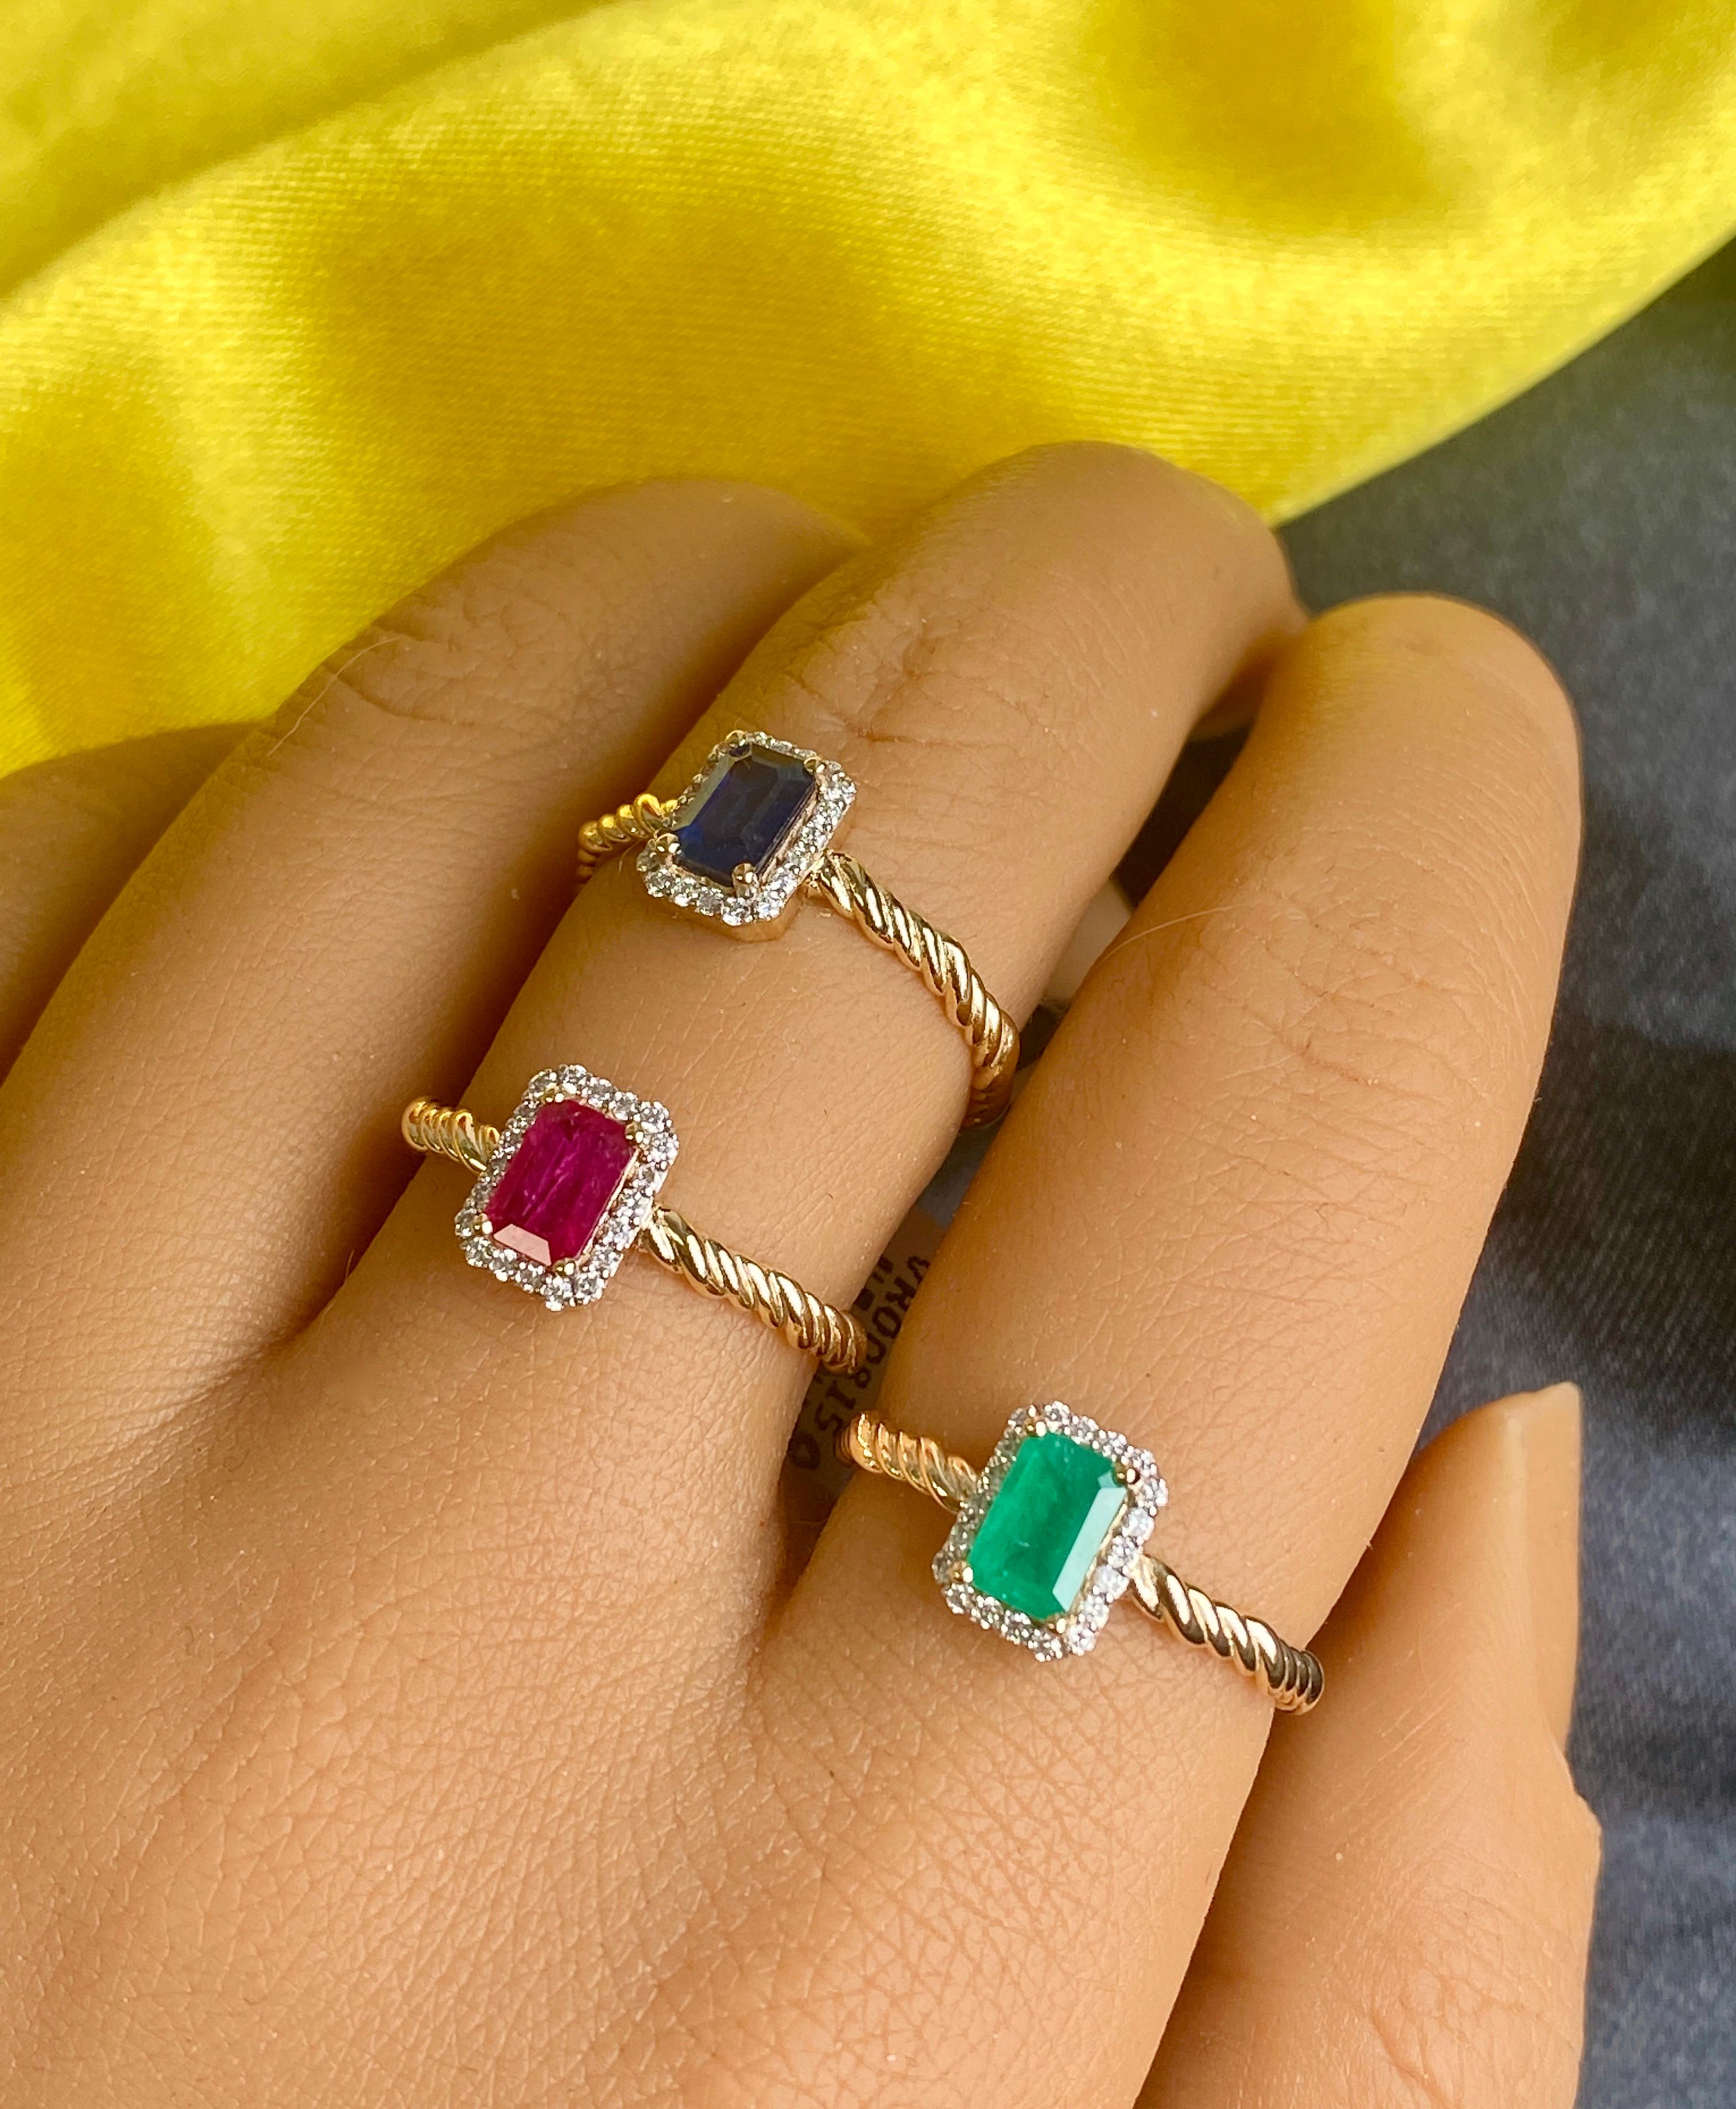 Women's Gemstone Solitaire Rings, Ruby Ring, Emerald Ring, Sapphire Ring, 14k Gold Ring For Sale